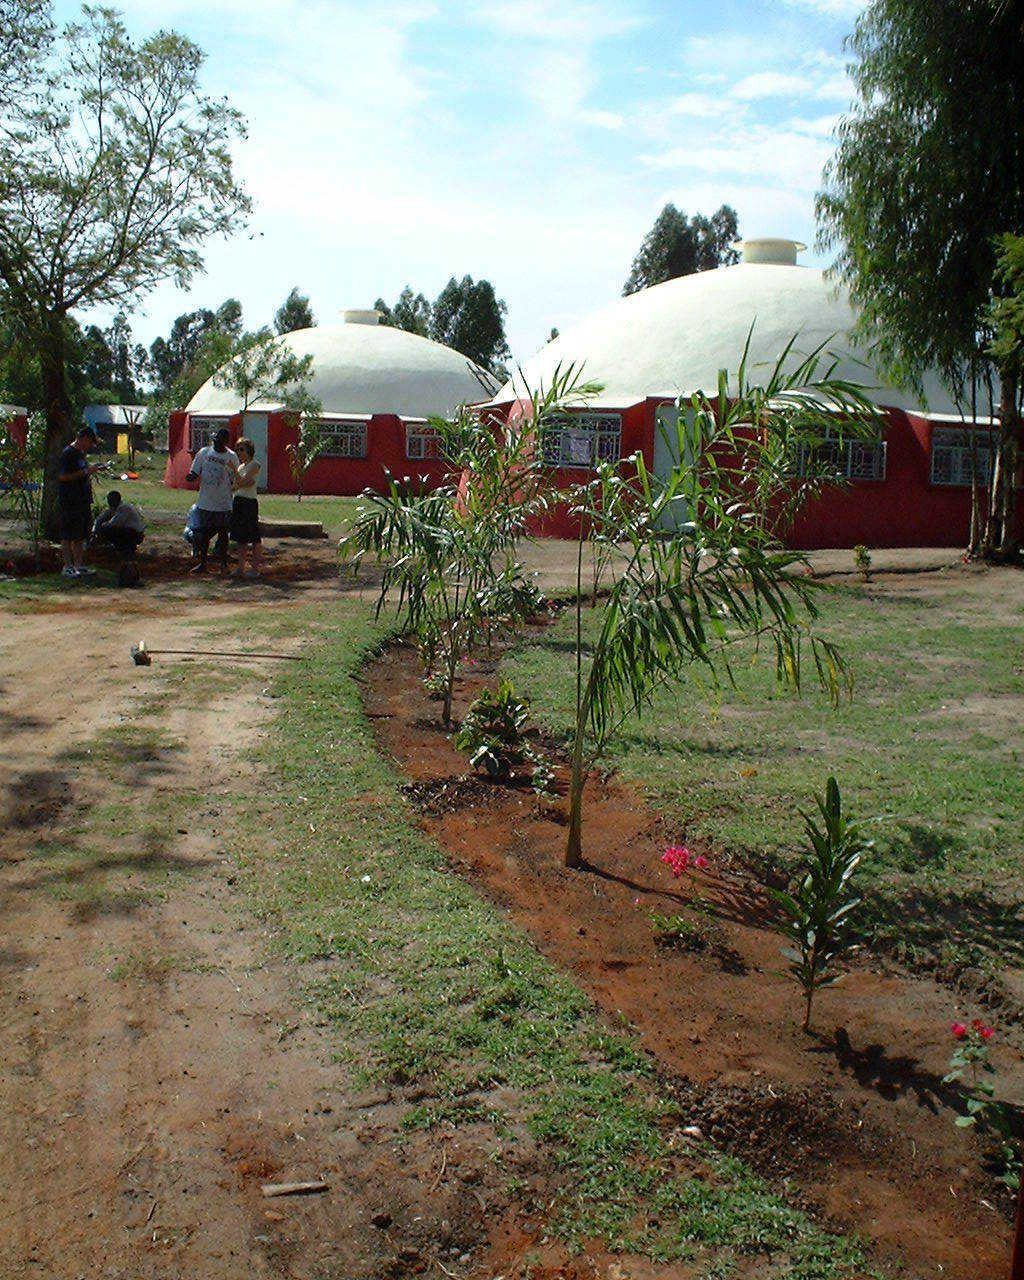 Here are two medical clinics built in Kenya, by hand, using Ecoshell I technology – extremely useful technology for low cost structures. Be sure to use Basalt reinforcing on the Ecoshells.